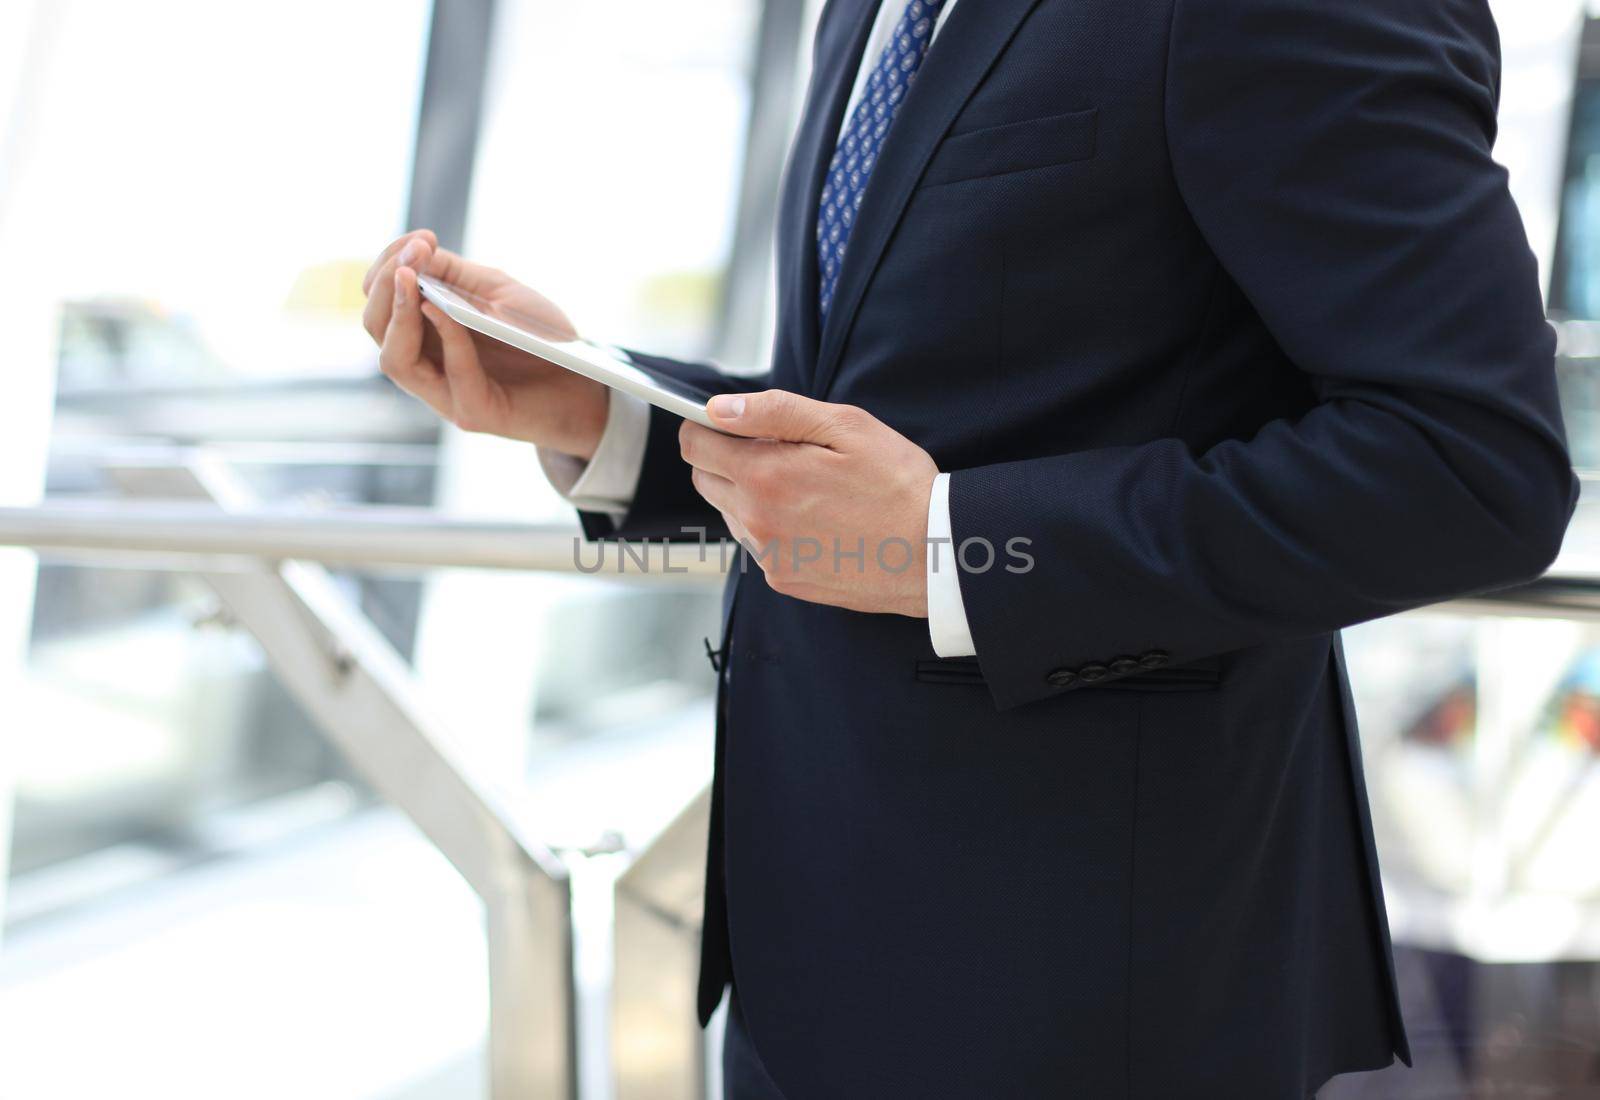 Midsection of businessman using digital tablet in office